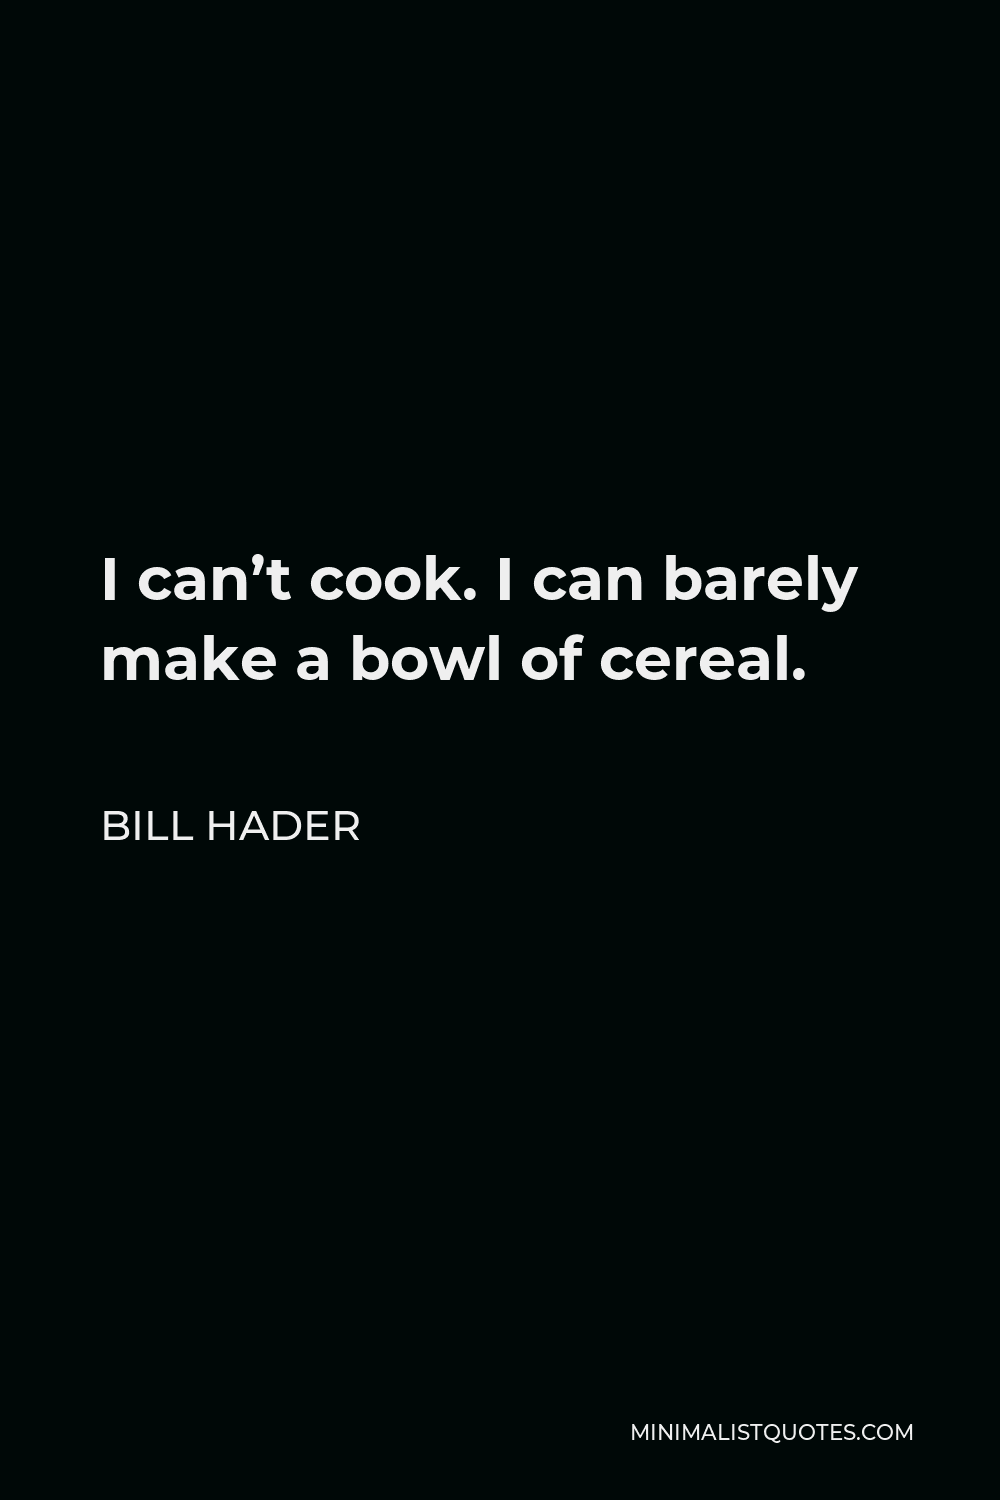 Bill Hader Quote - I can’t cook. I can barely make a bowl of cereal.